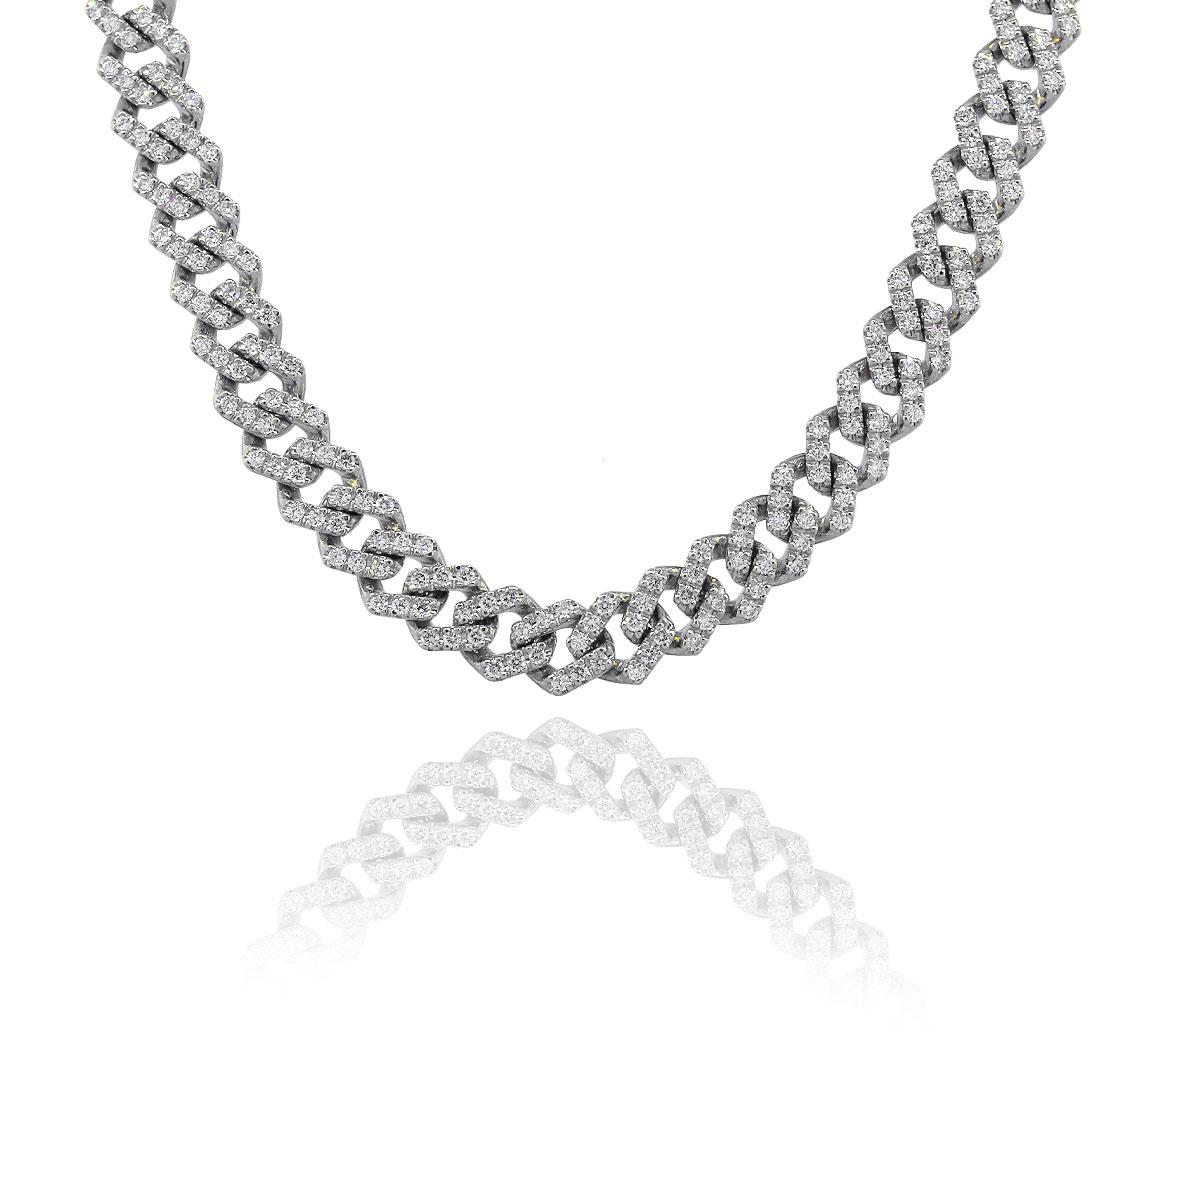 Material: 14k white Gold
Diamond Details: Approx. 13.03ctw of round cut diamonds. Diamonds are G/H in color and VS in clarity
Measurements: Necklace measures 22″ in length.
Fastening: Tongue in box clasp with safety latch
Item Weight: 82.8g